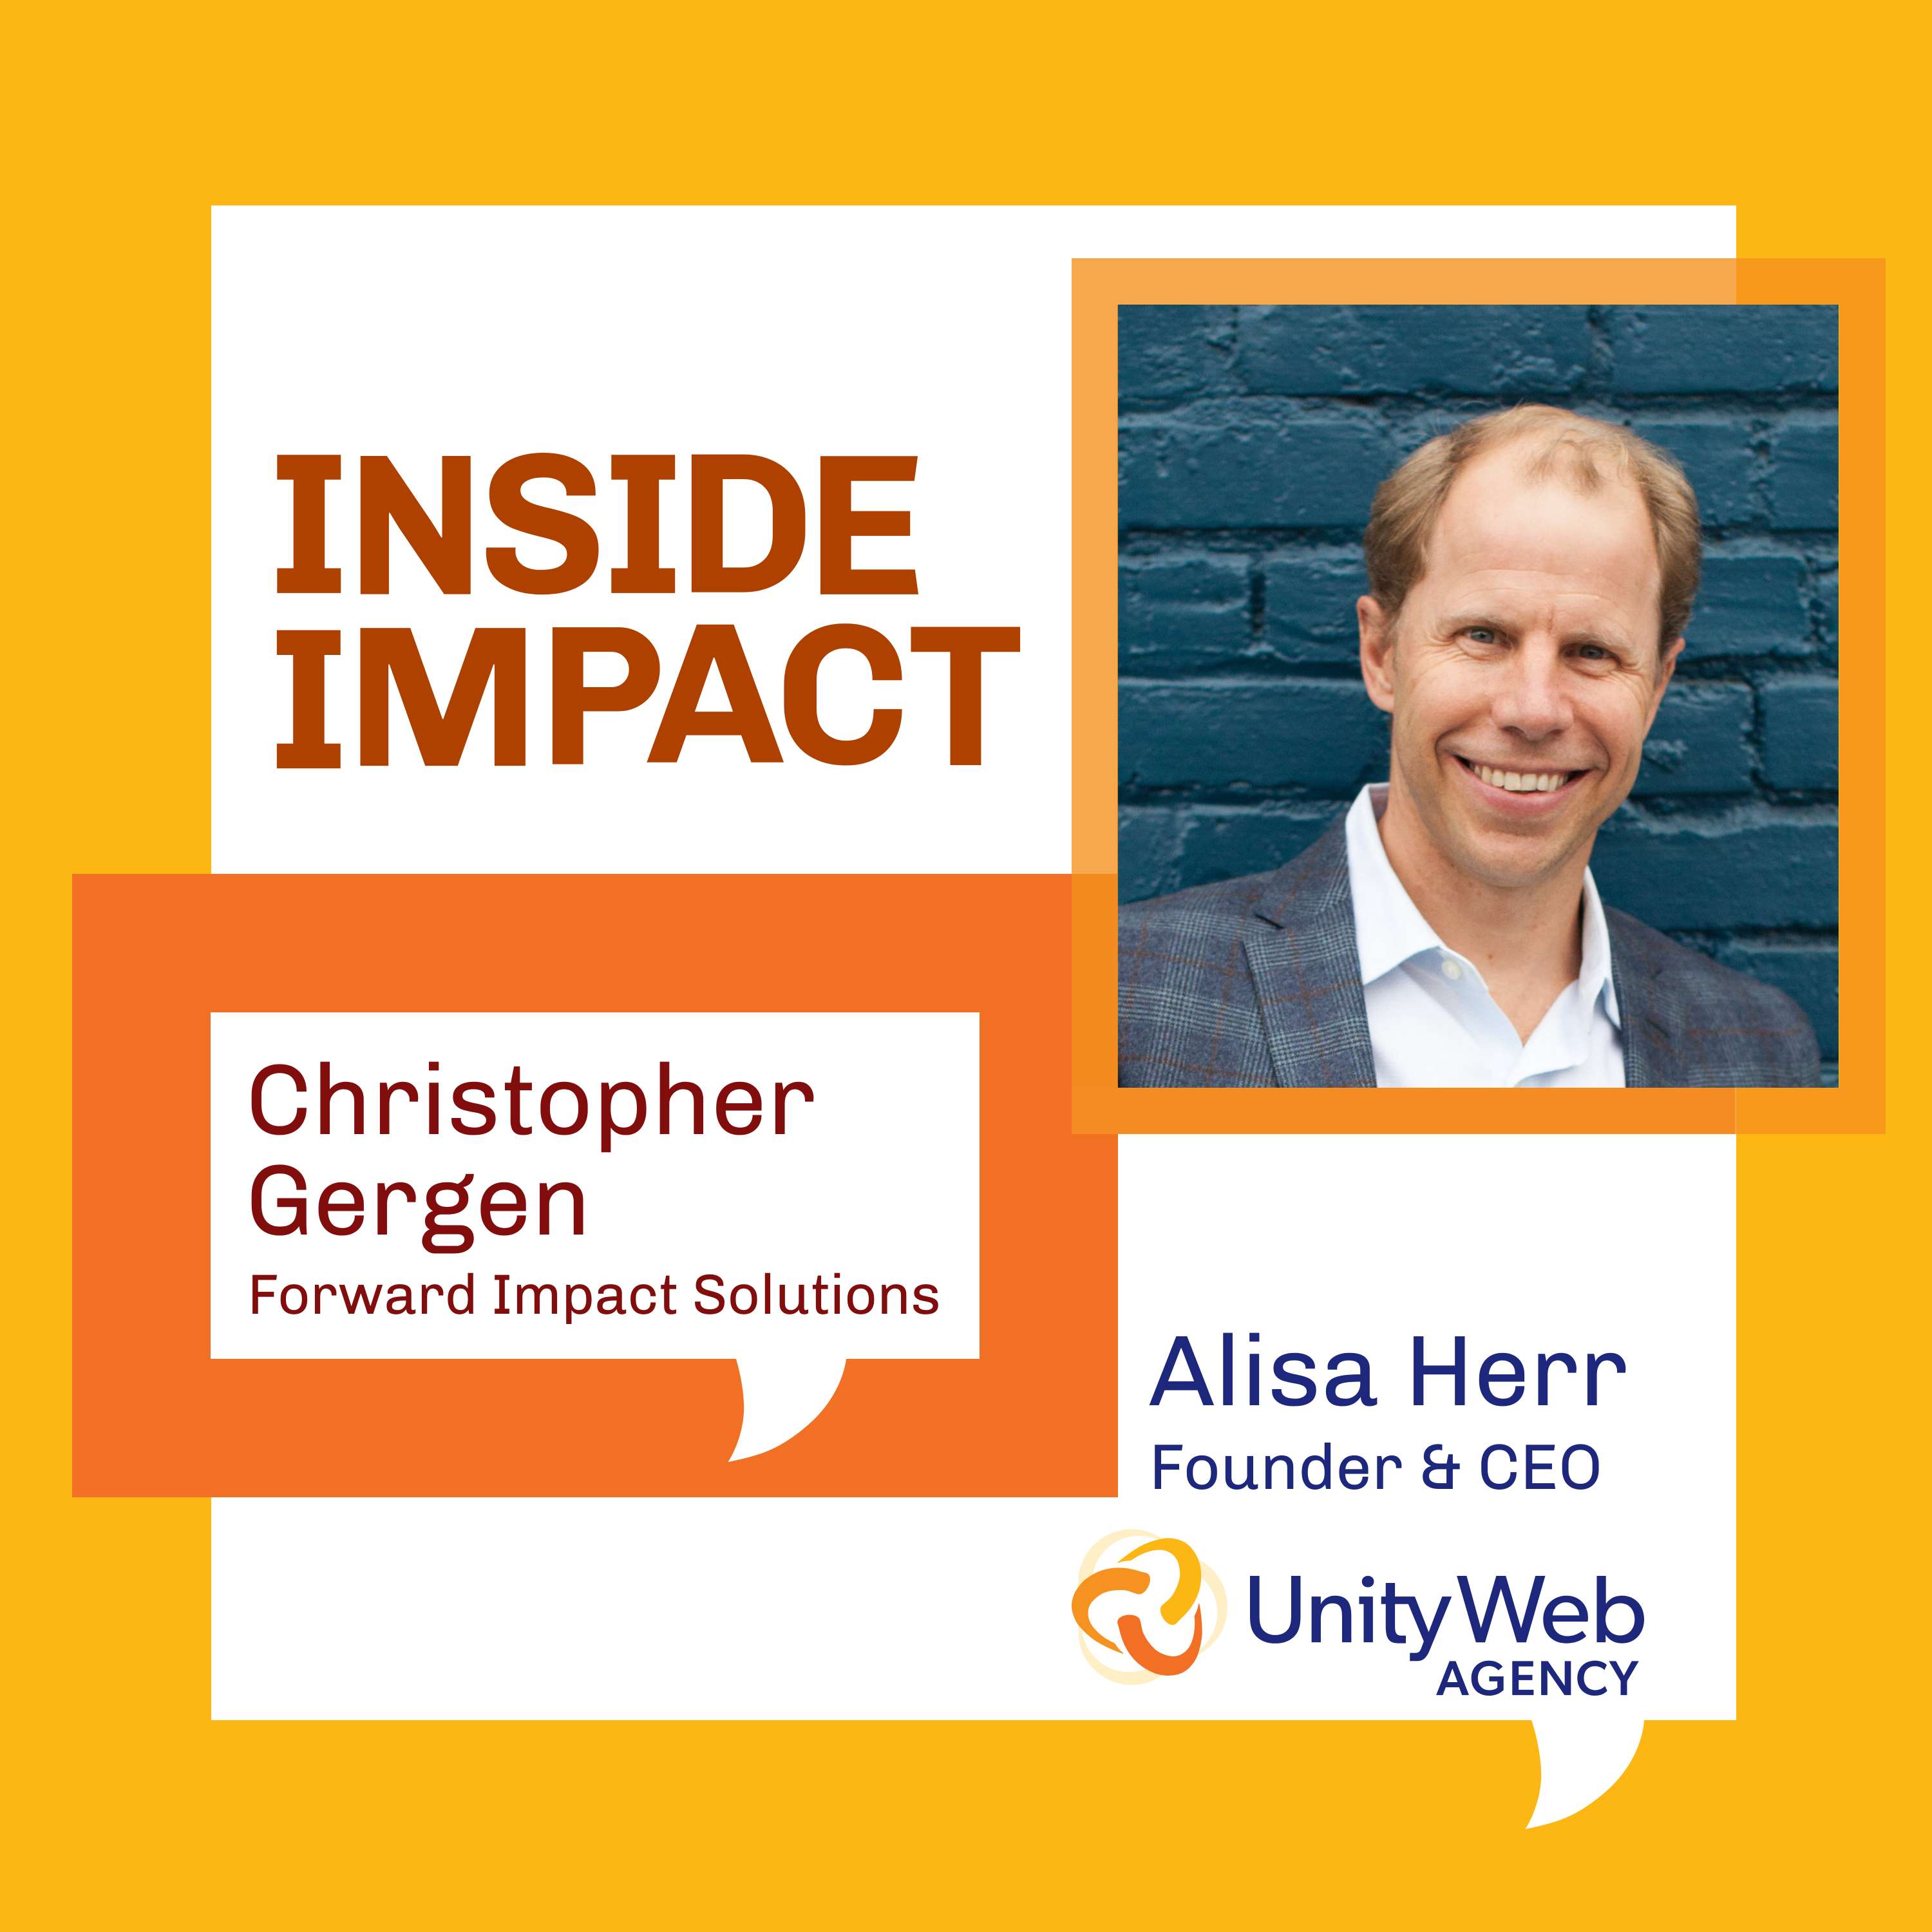 Social entrepreneurship and moving the needle, with Forward Impact Solutions' Christopher Gergen